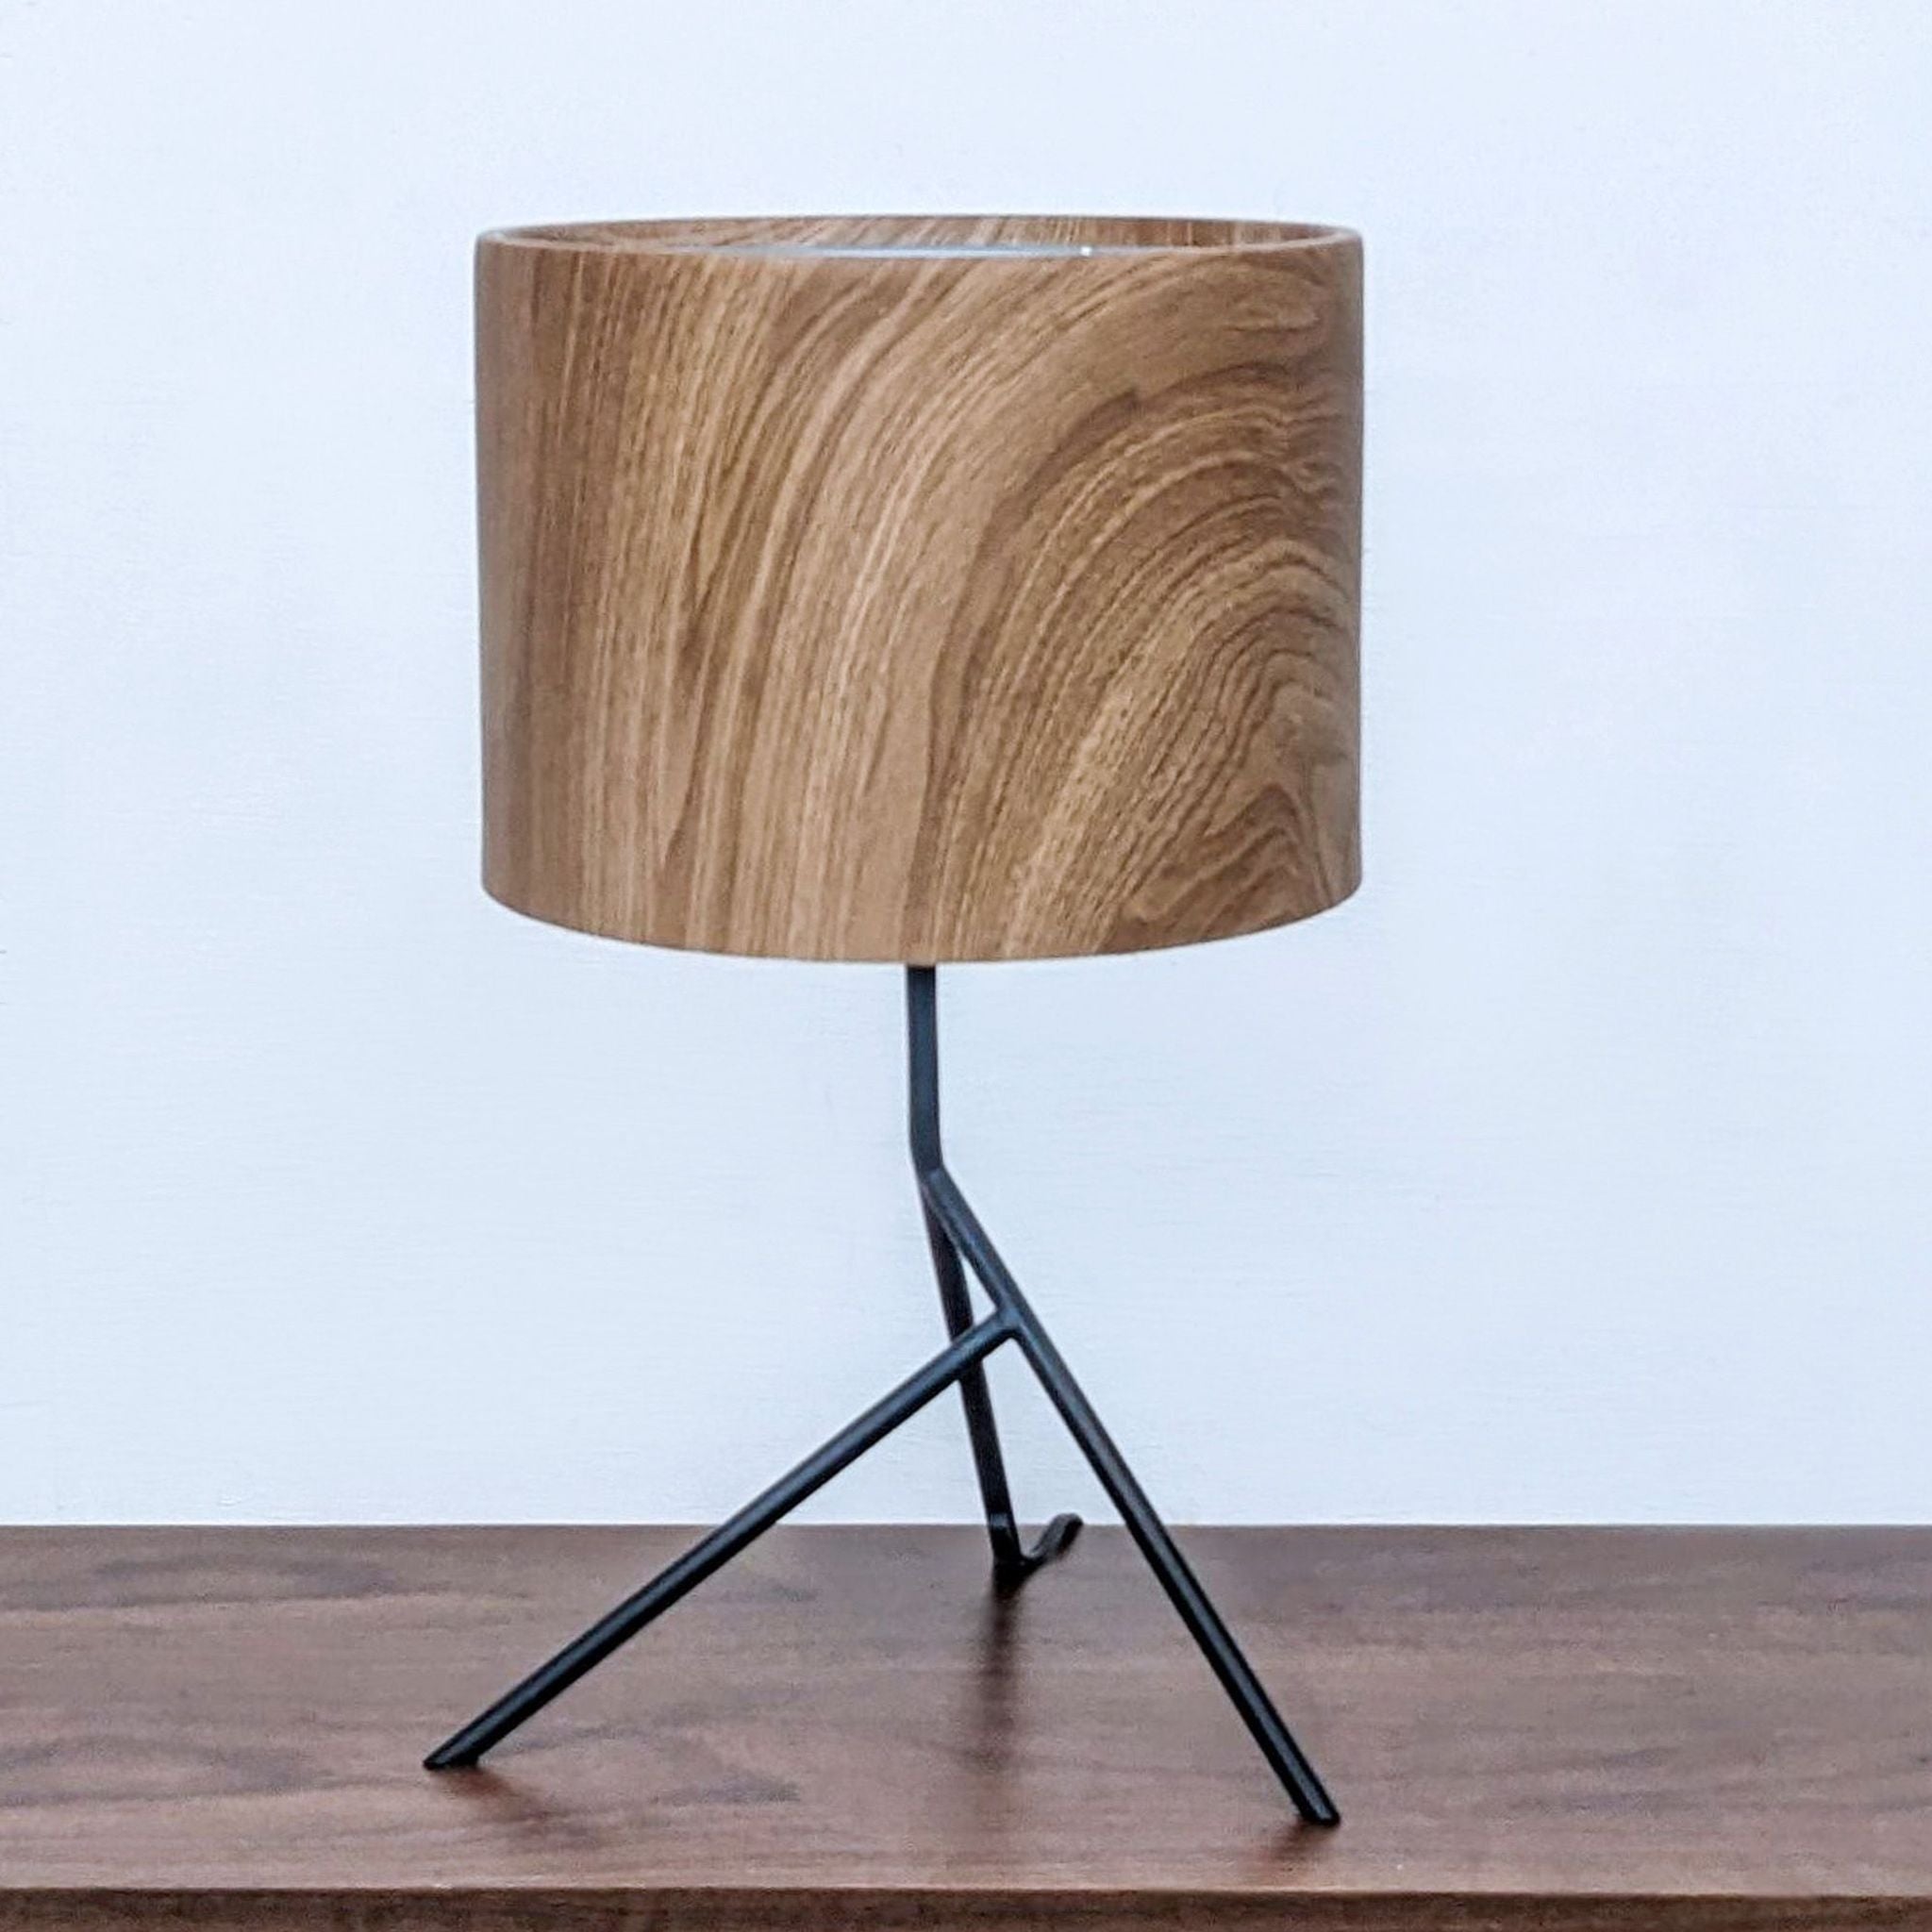 Alt text 1: Reperch brand modern table lamp with a wooden shade and a black tripod base on a wooden surface.